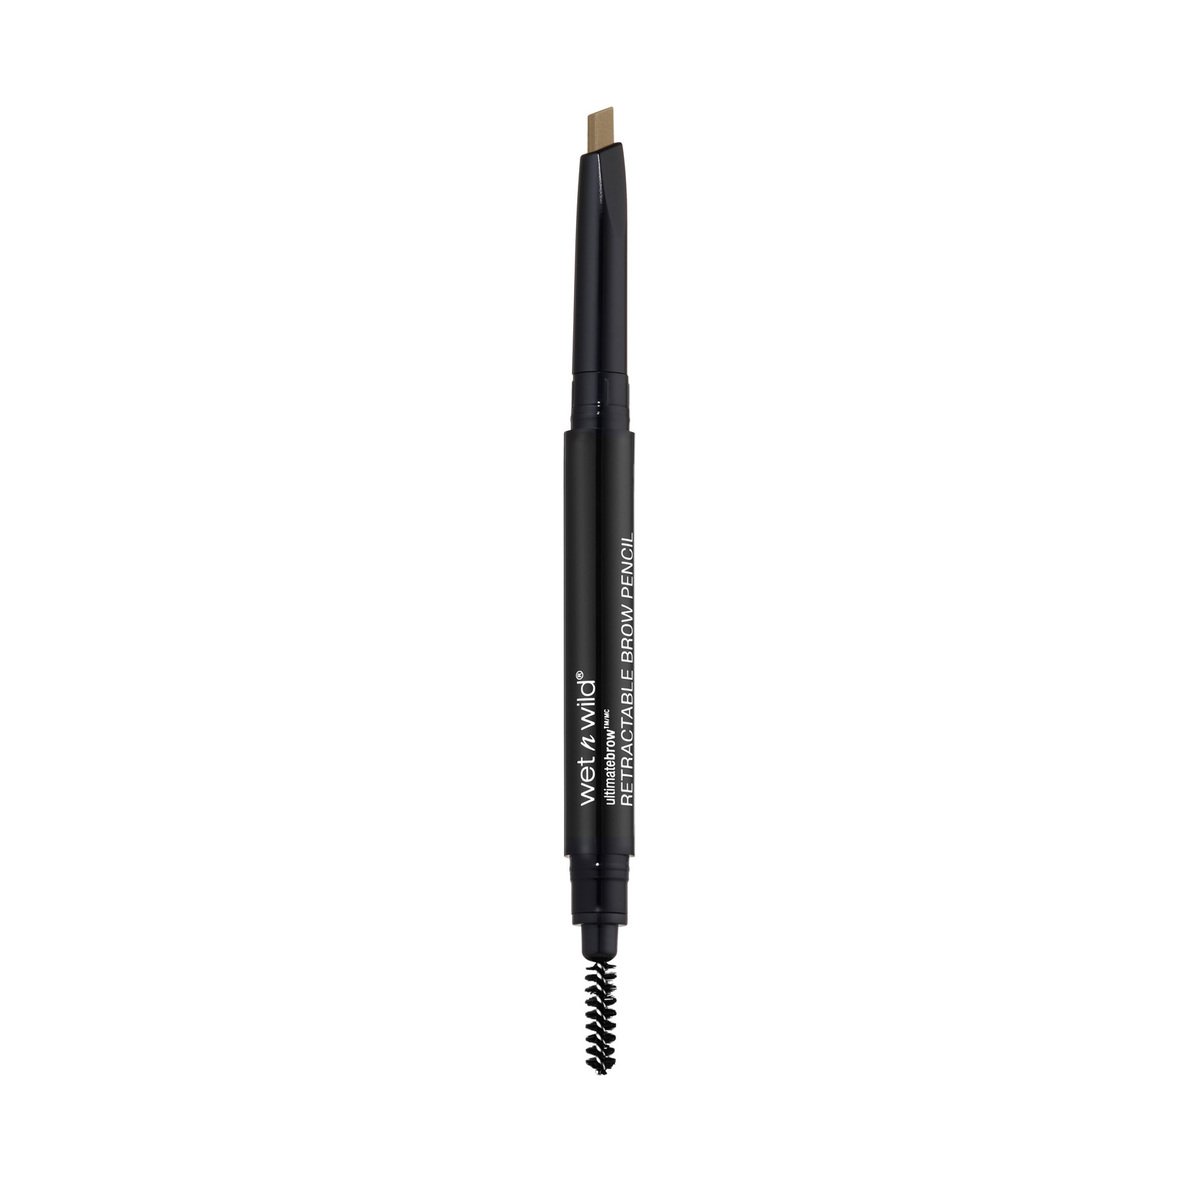 Wet And Wild Ultimate Brow Retractable Pencil - Taupe WnW00E625A 1pc